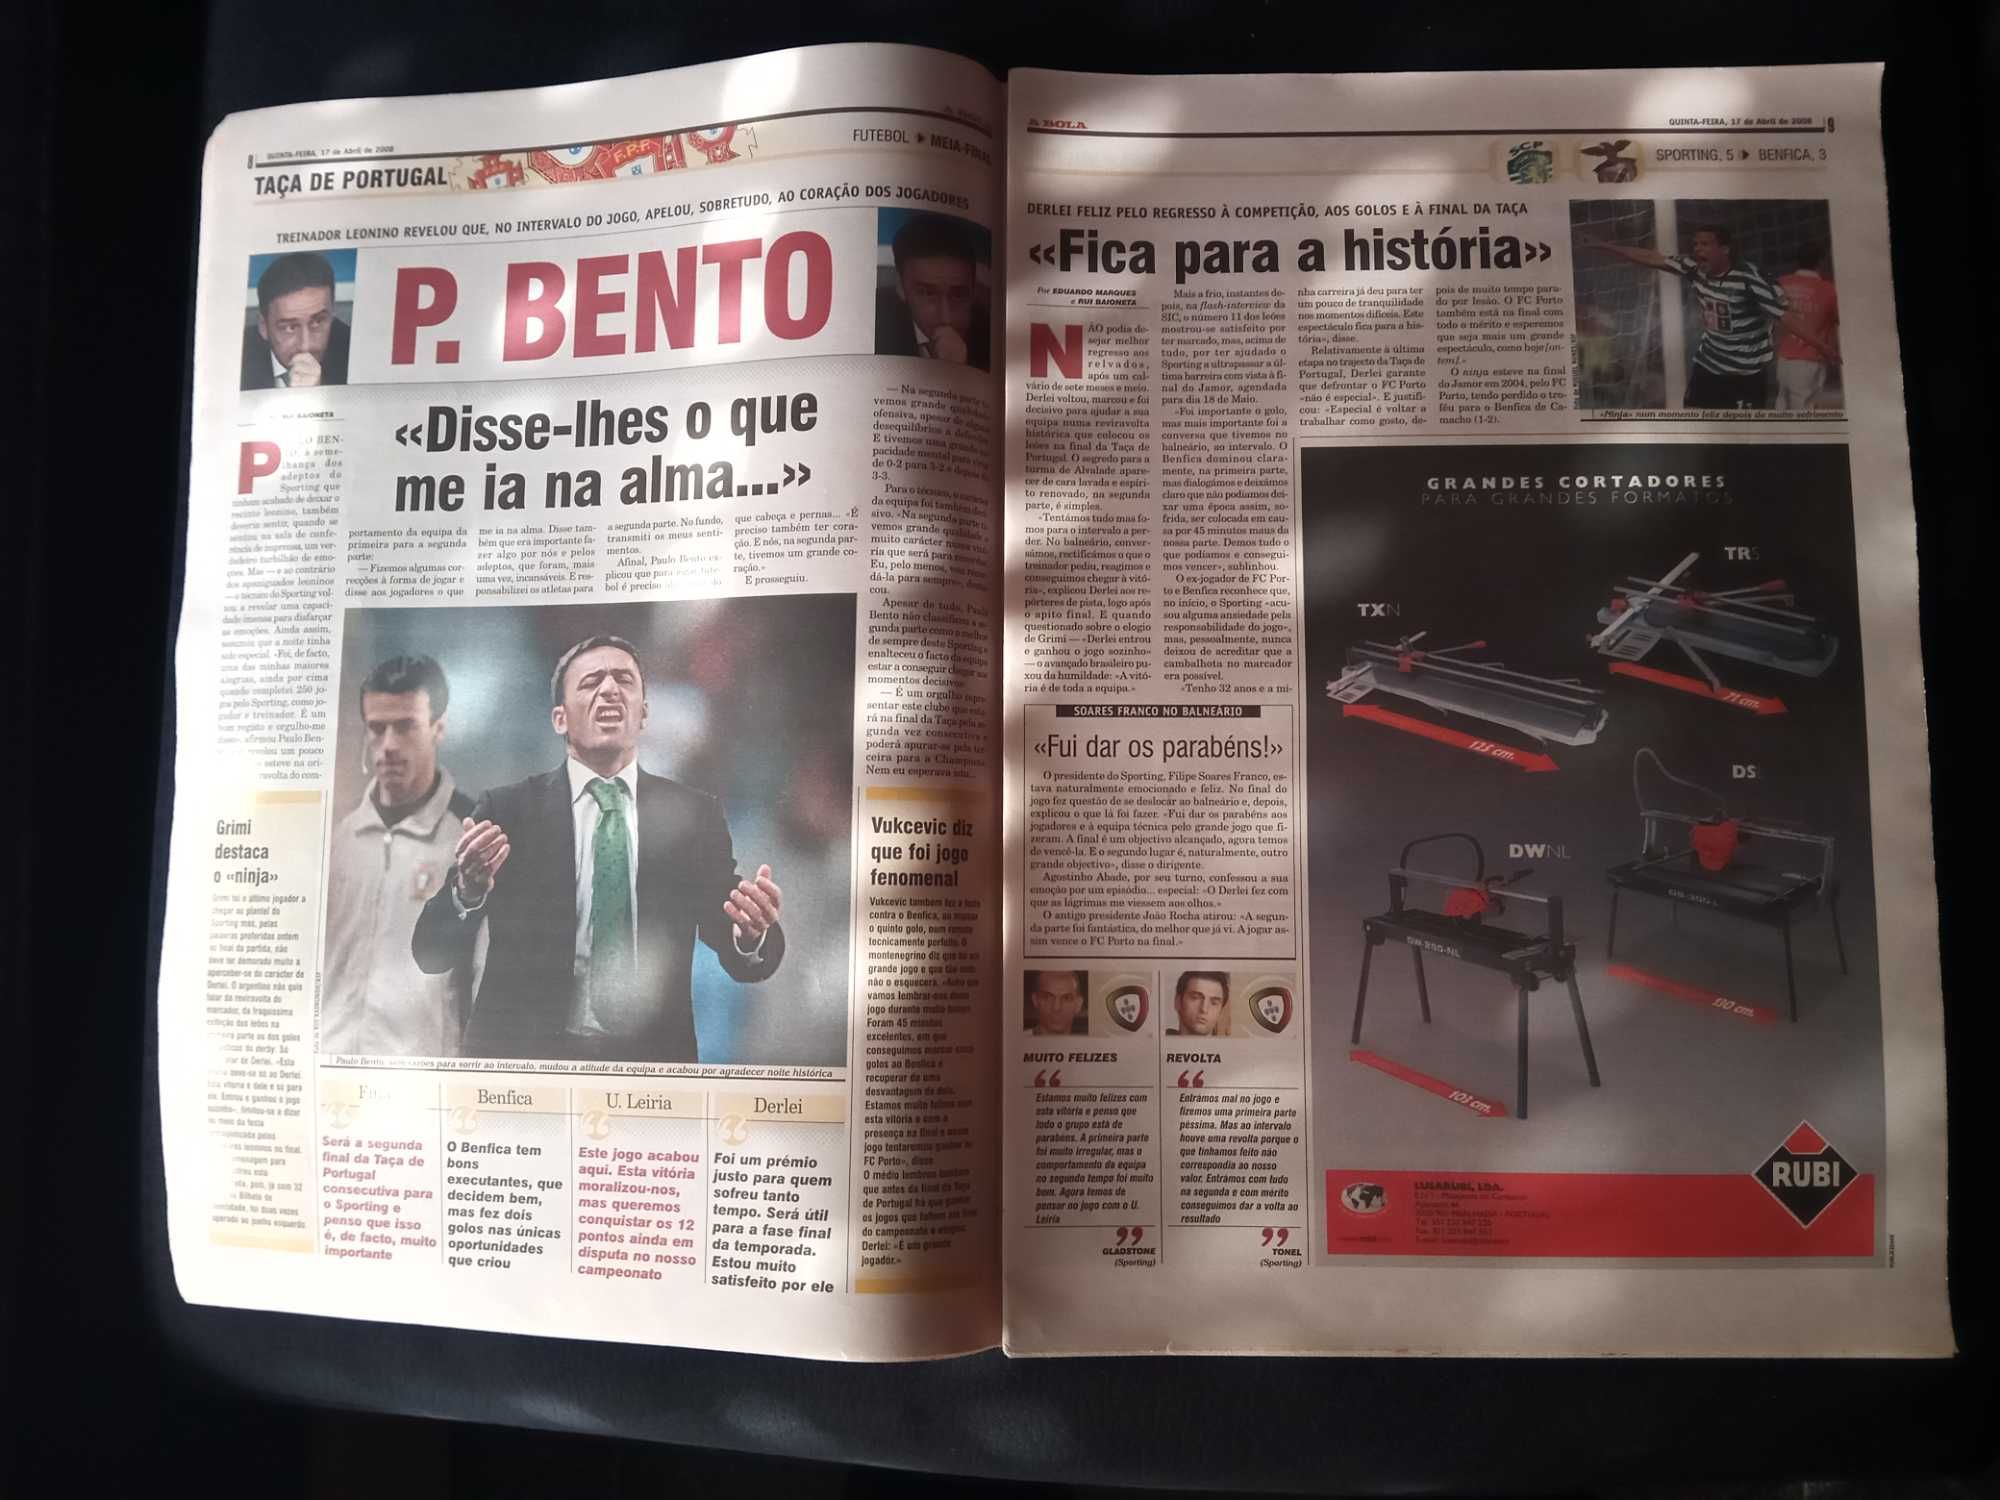 Jornal a Bola Sporting 5 Benfica 3